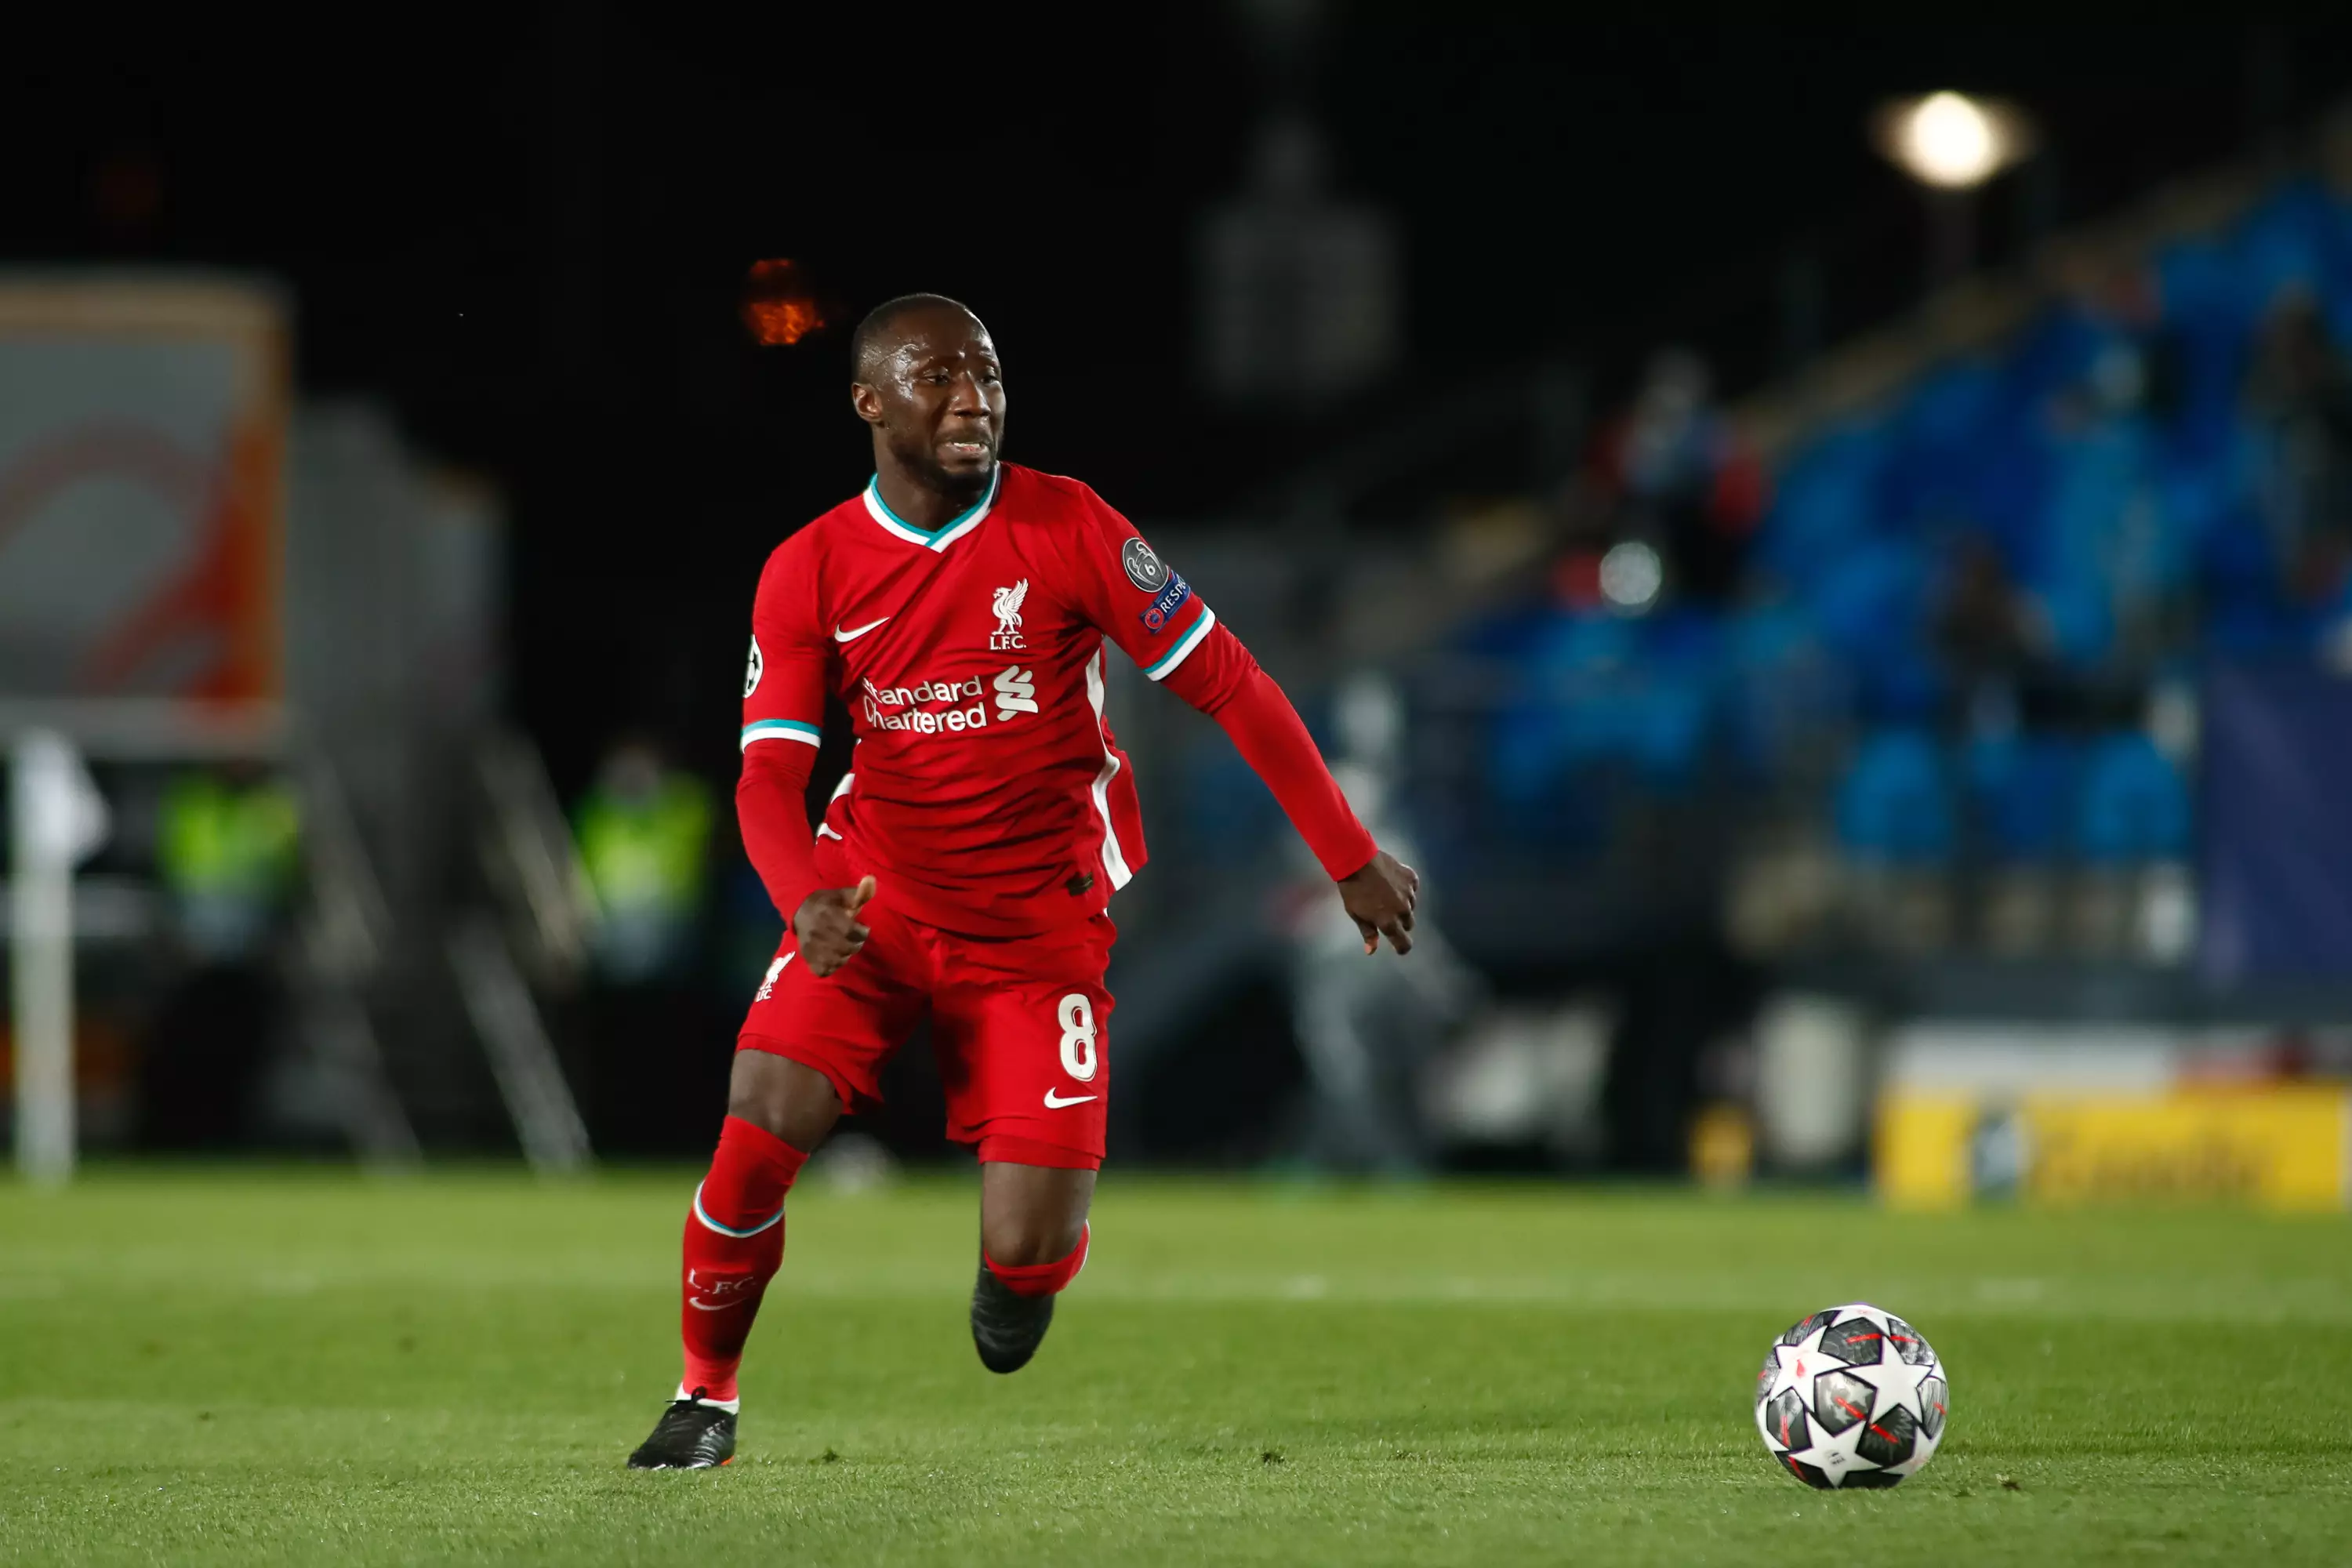 Keita had a poor night against Real but it's no excuse for the disgusting abuse from fans. Image: PA Images